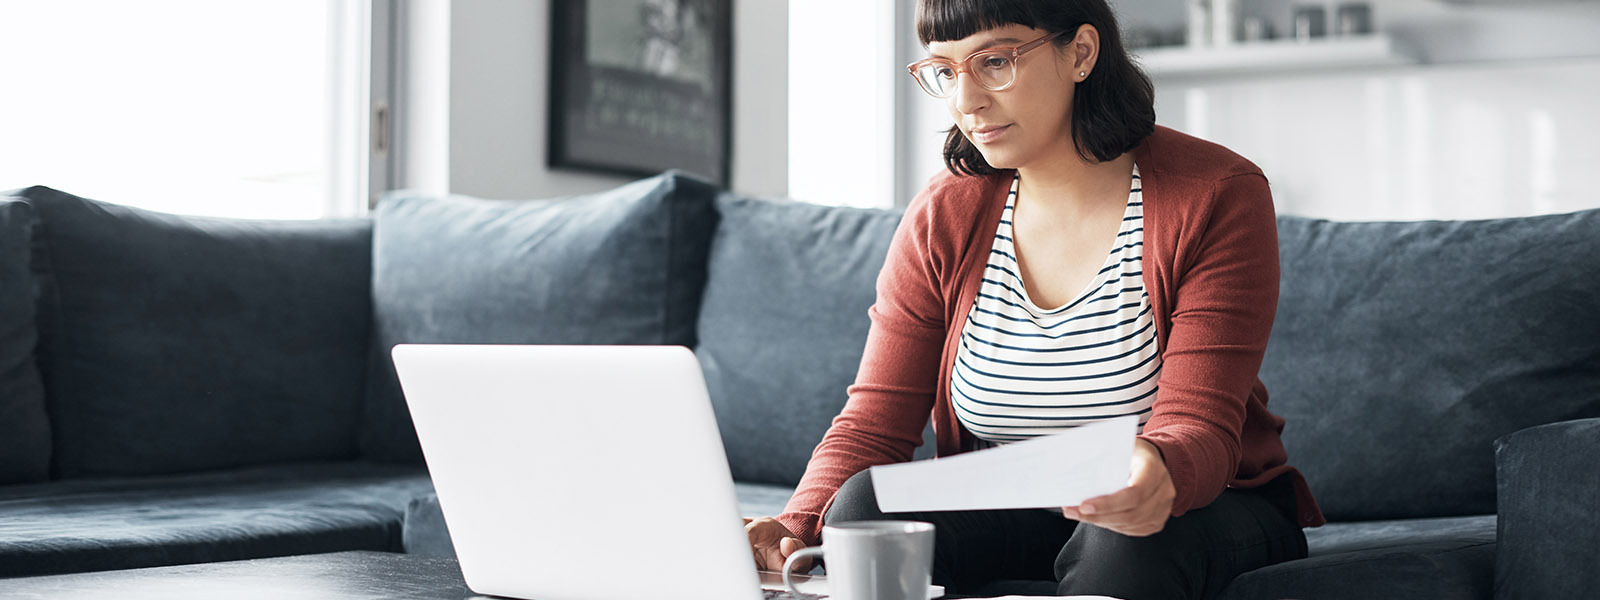 Woman looking at laptop on coffee table and holding a tax document